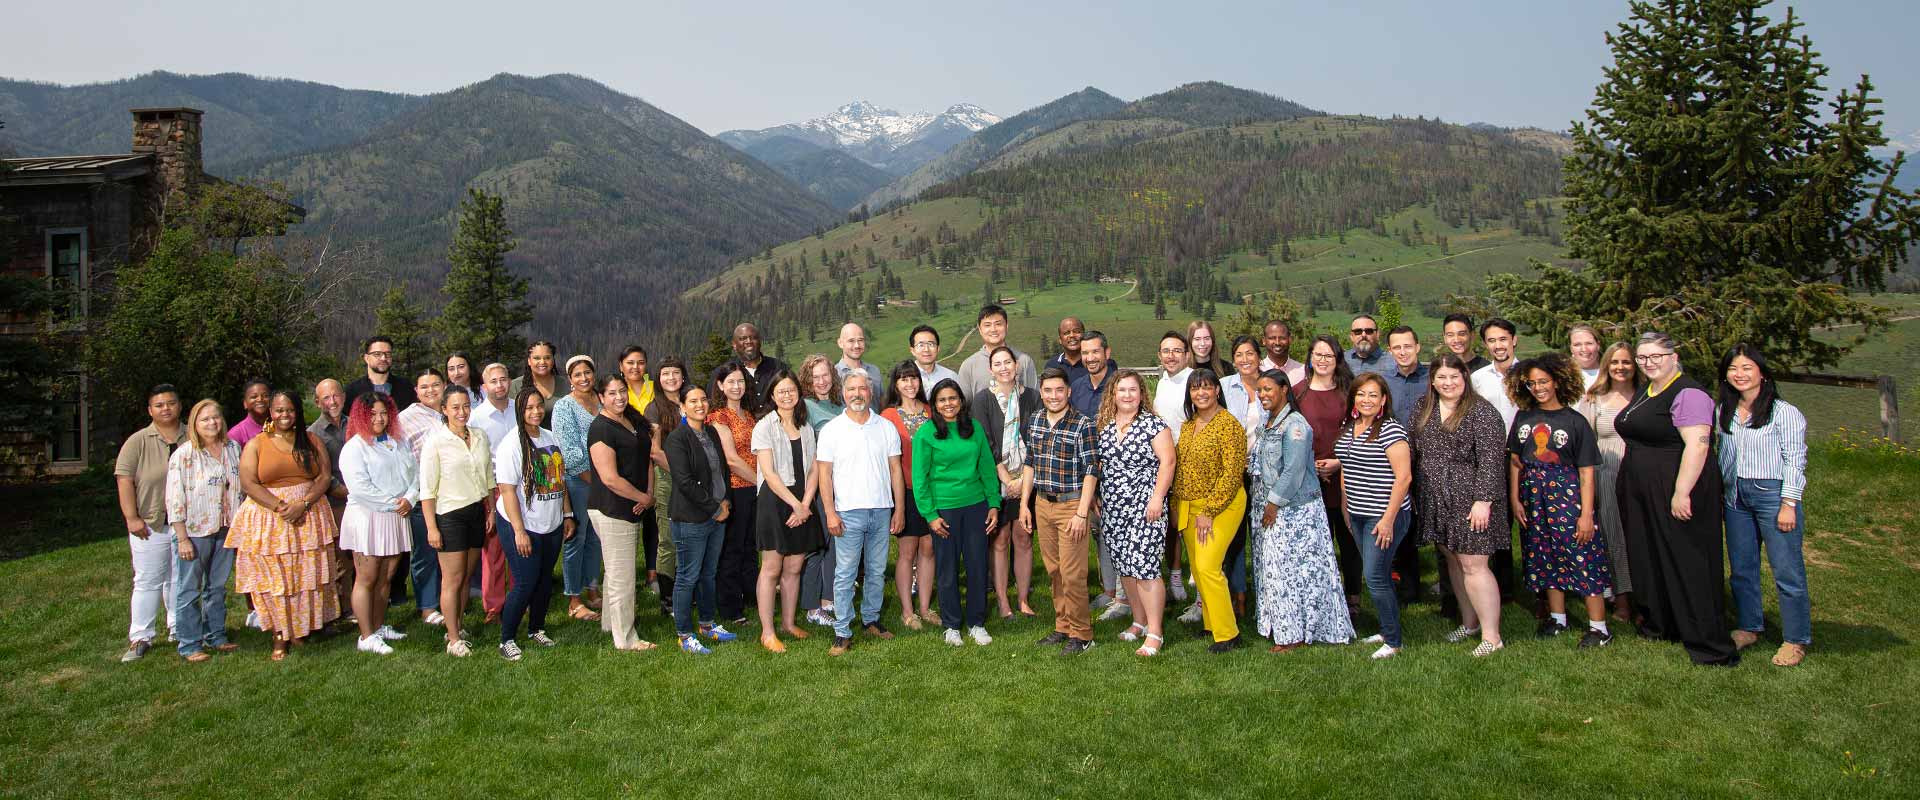 A group of more than 50 people pose outdoors with the backdrop of the Cascades mountain range behind them.